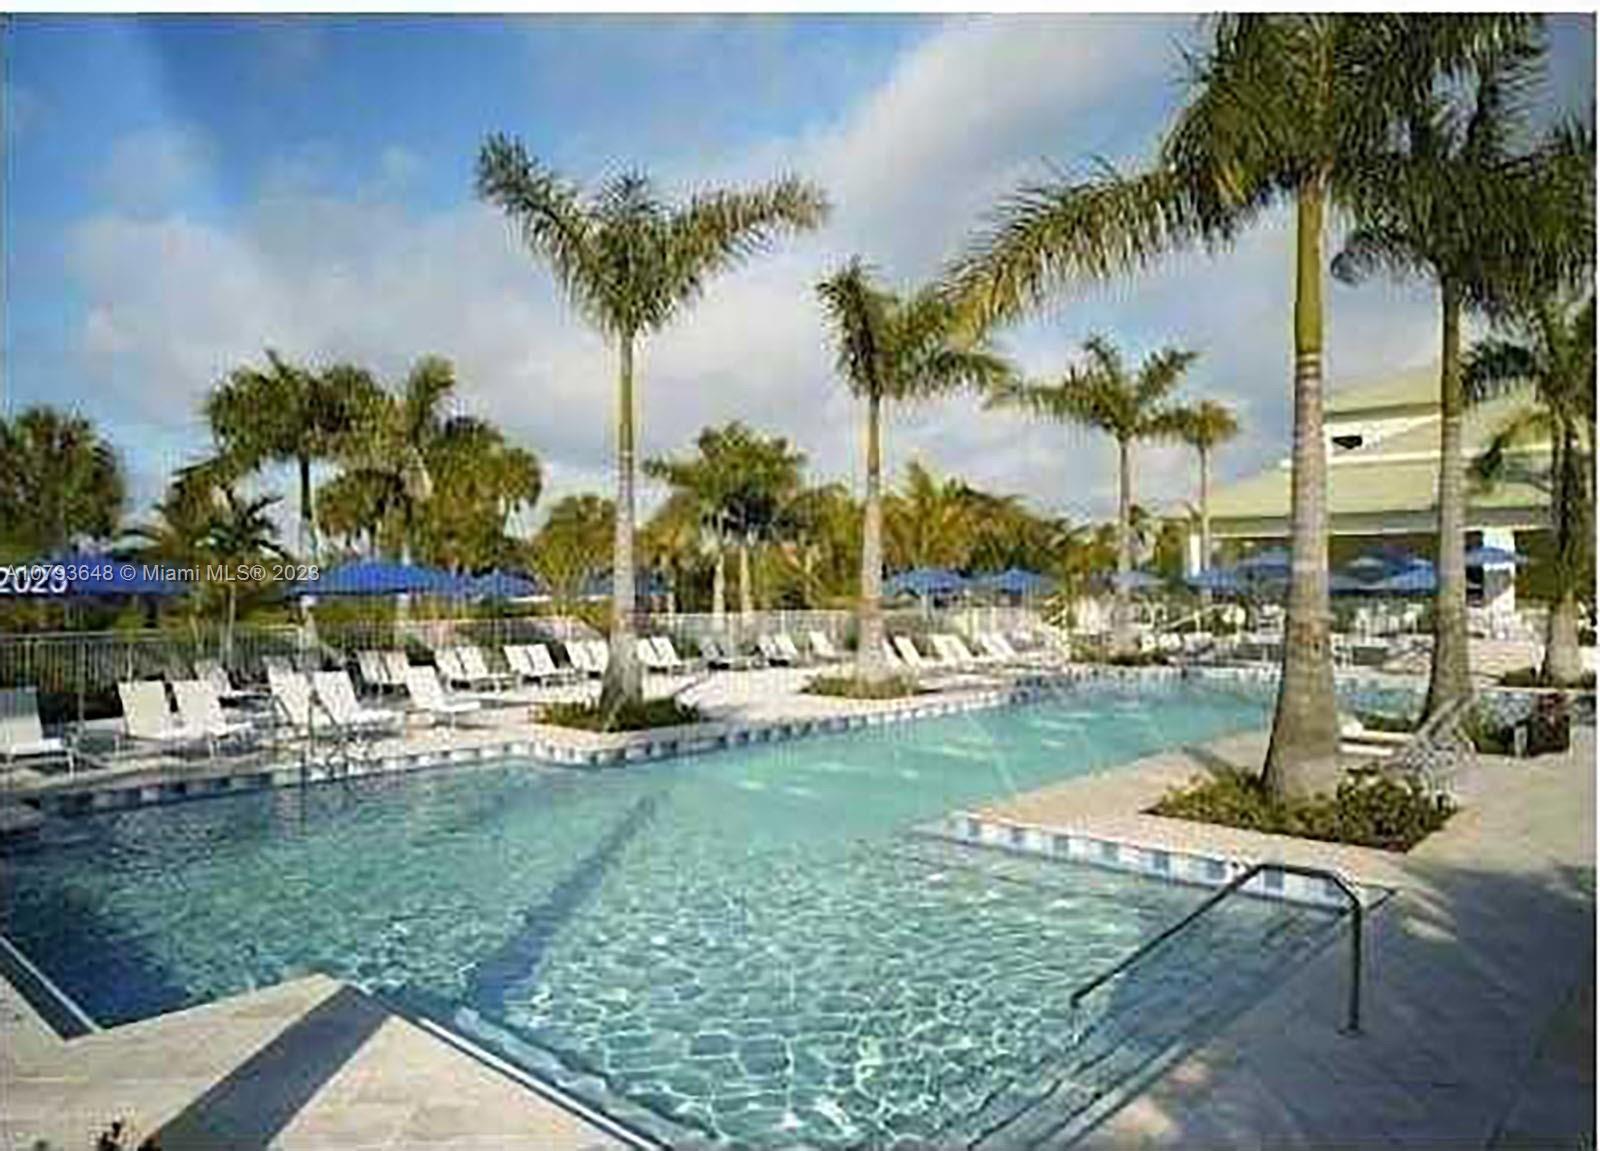 Photo 8 of The Blue A Resort Hotel C Apt 1507 in Doral - MLS A10793648